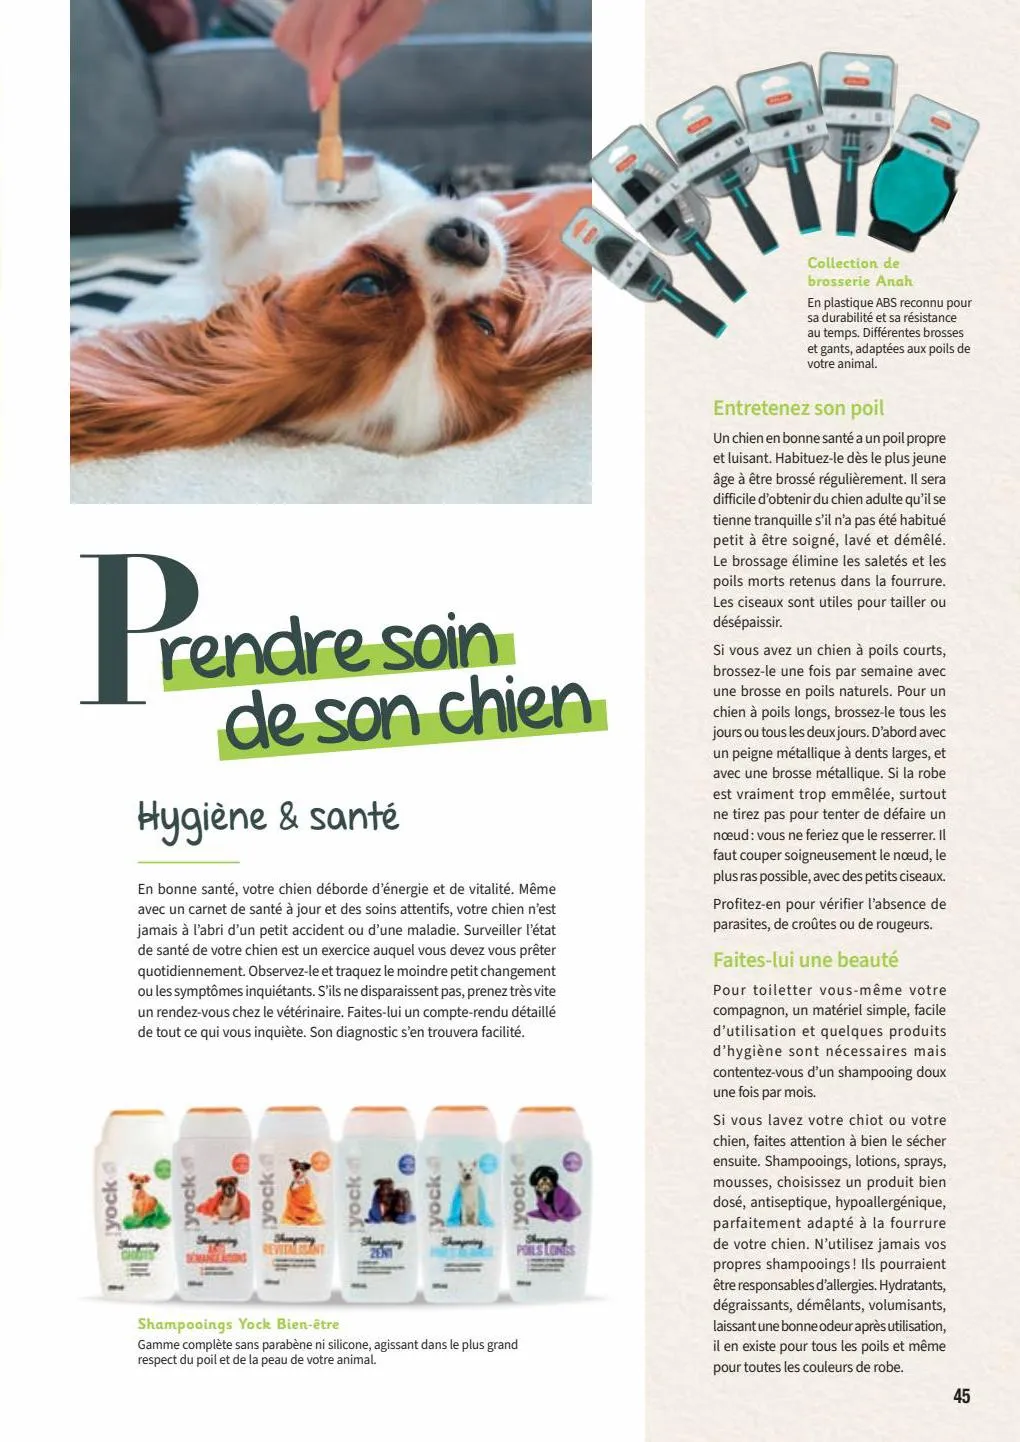 Catalogue Guide chiens et chats 2022-2023, page 00045